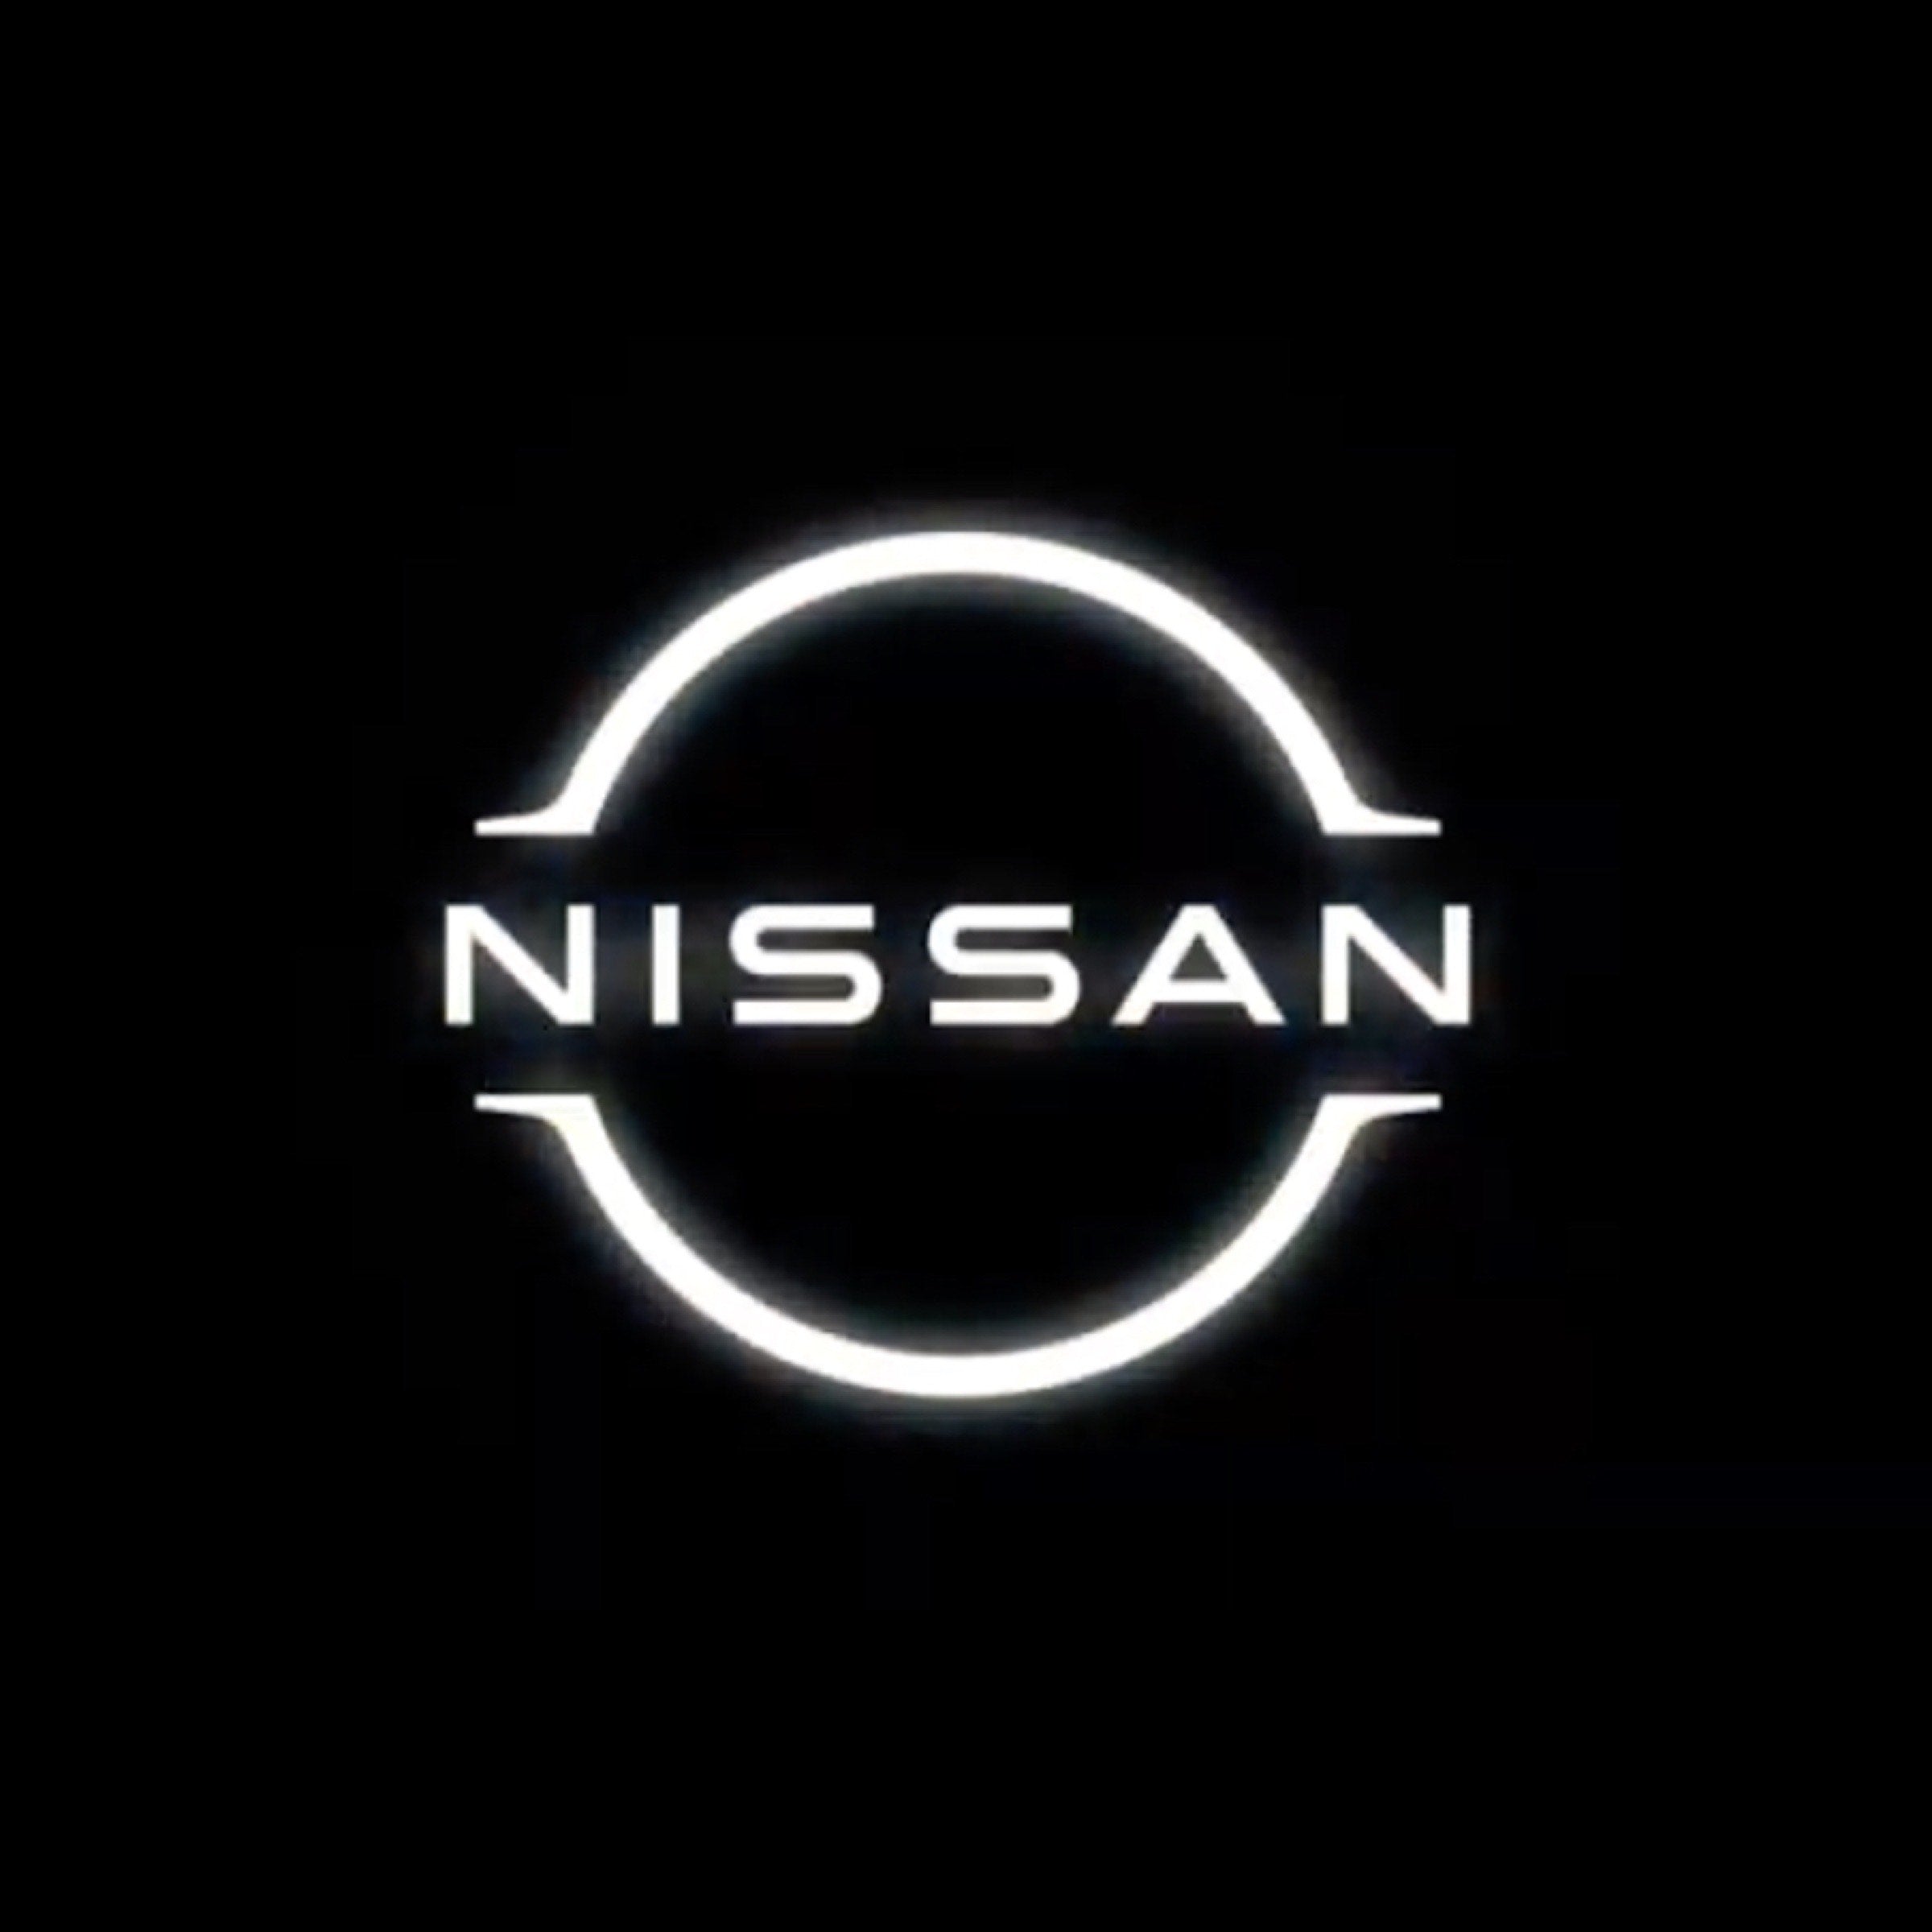 Nissan logo in white with black backdrop